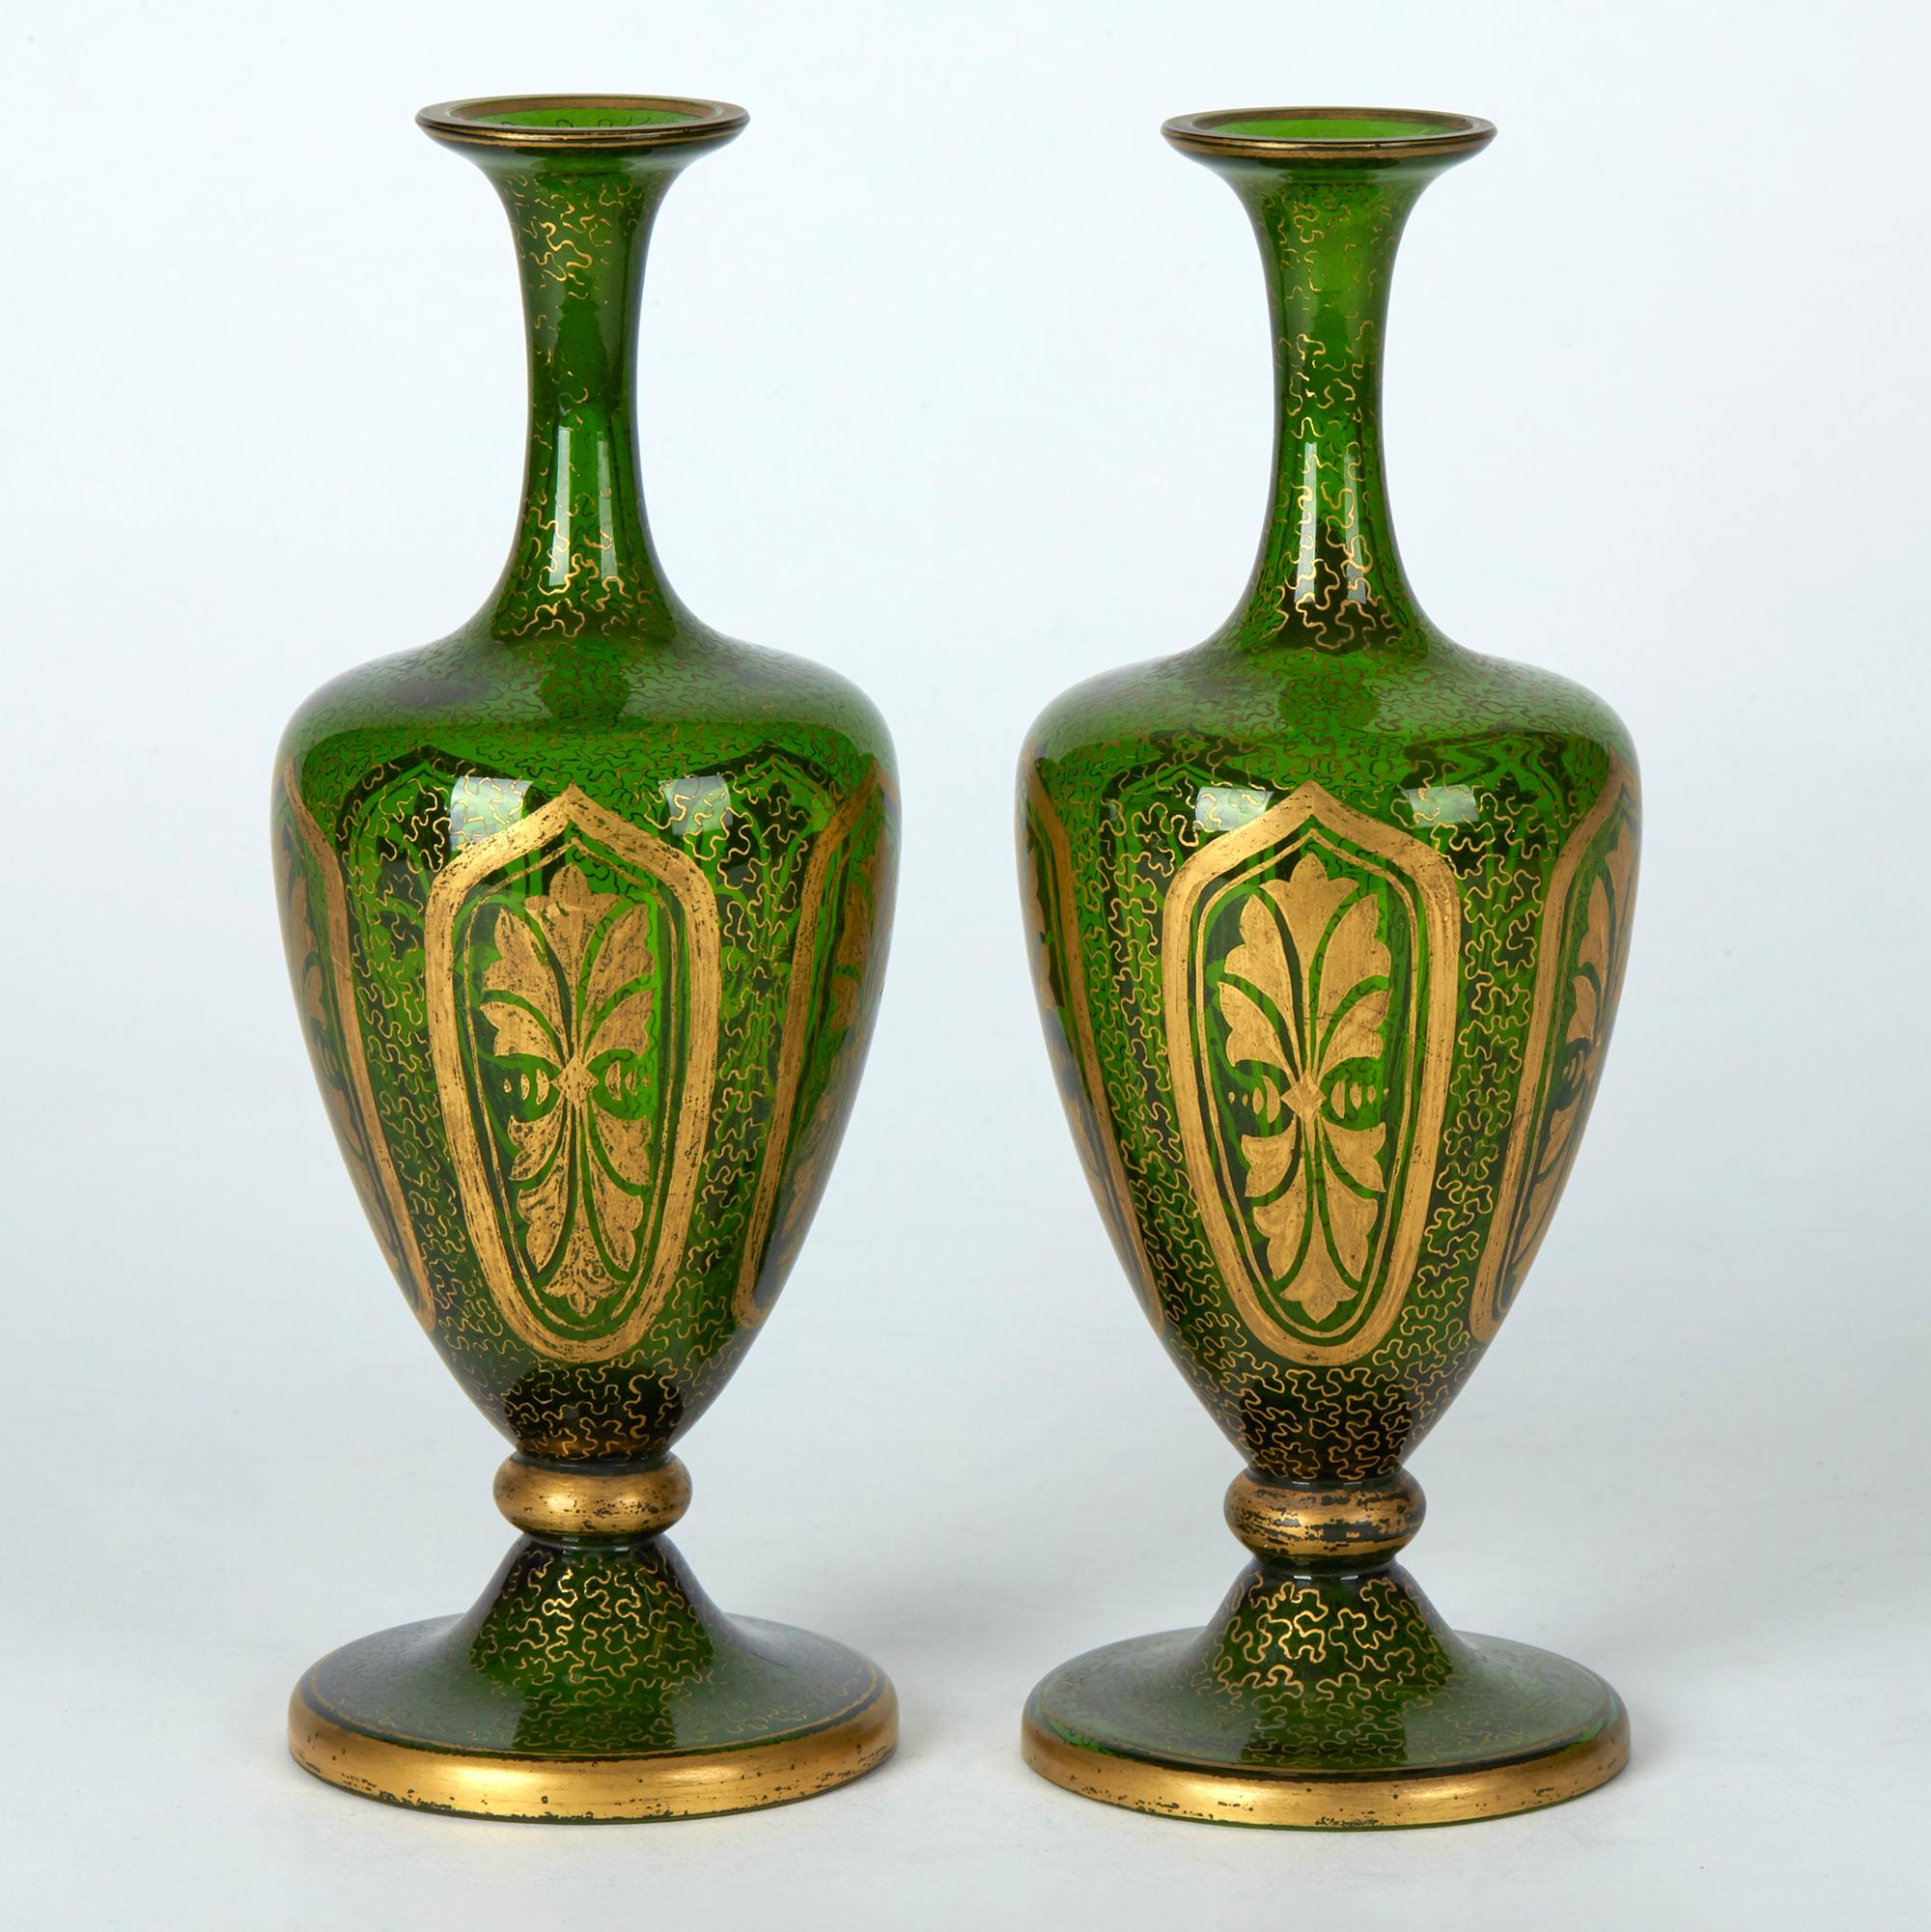 Czech Pair of Antique Bohemian Gilded Green Glass Vases, 19th Century